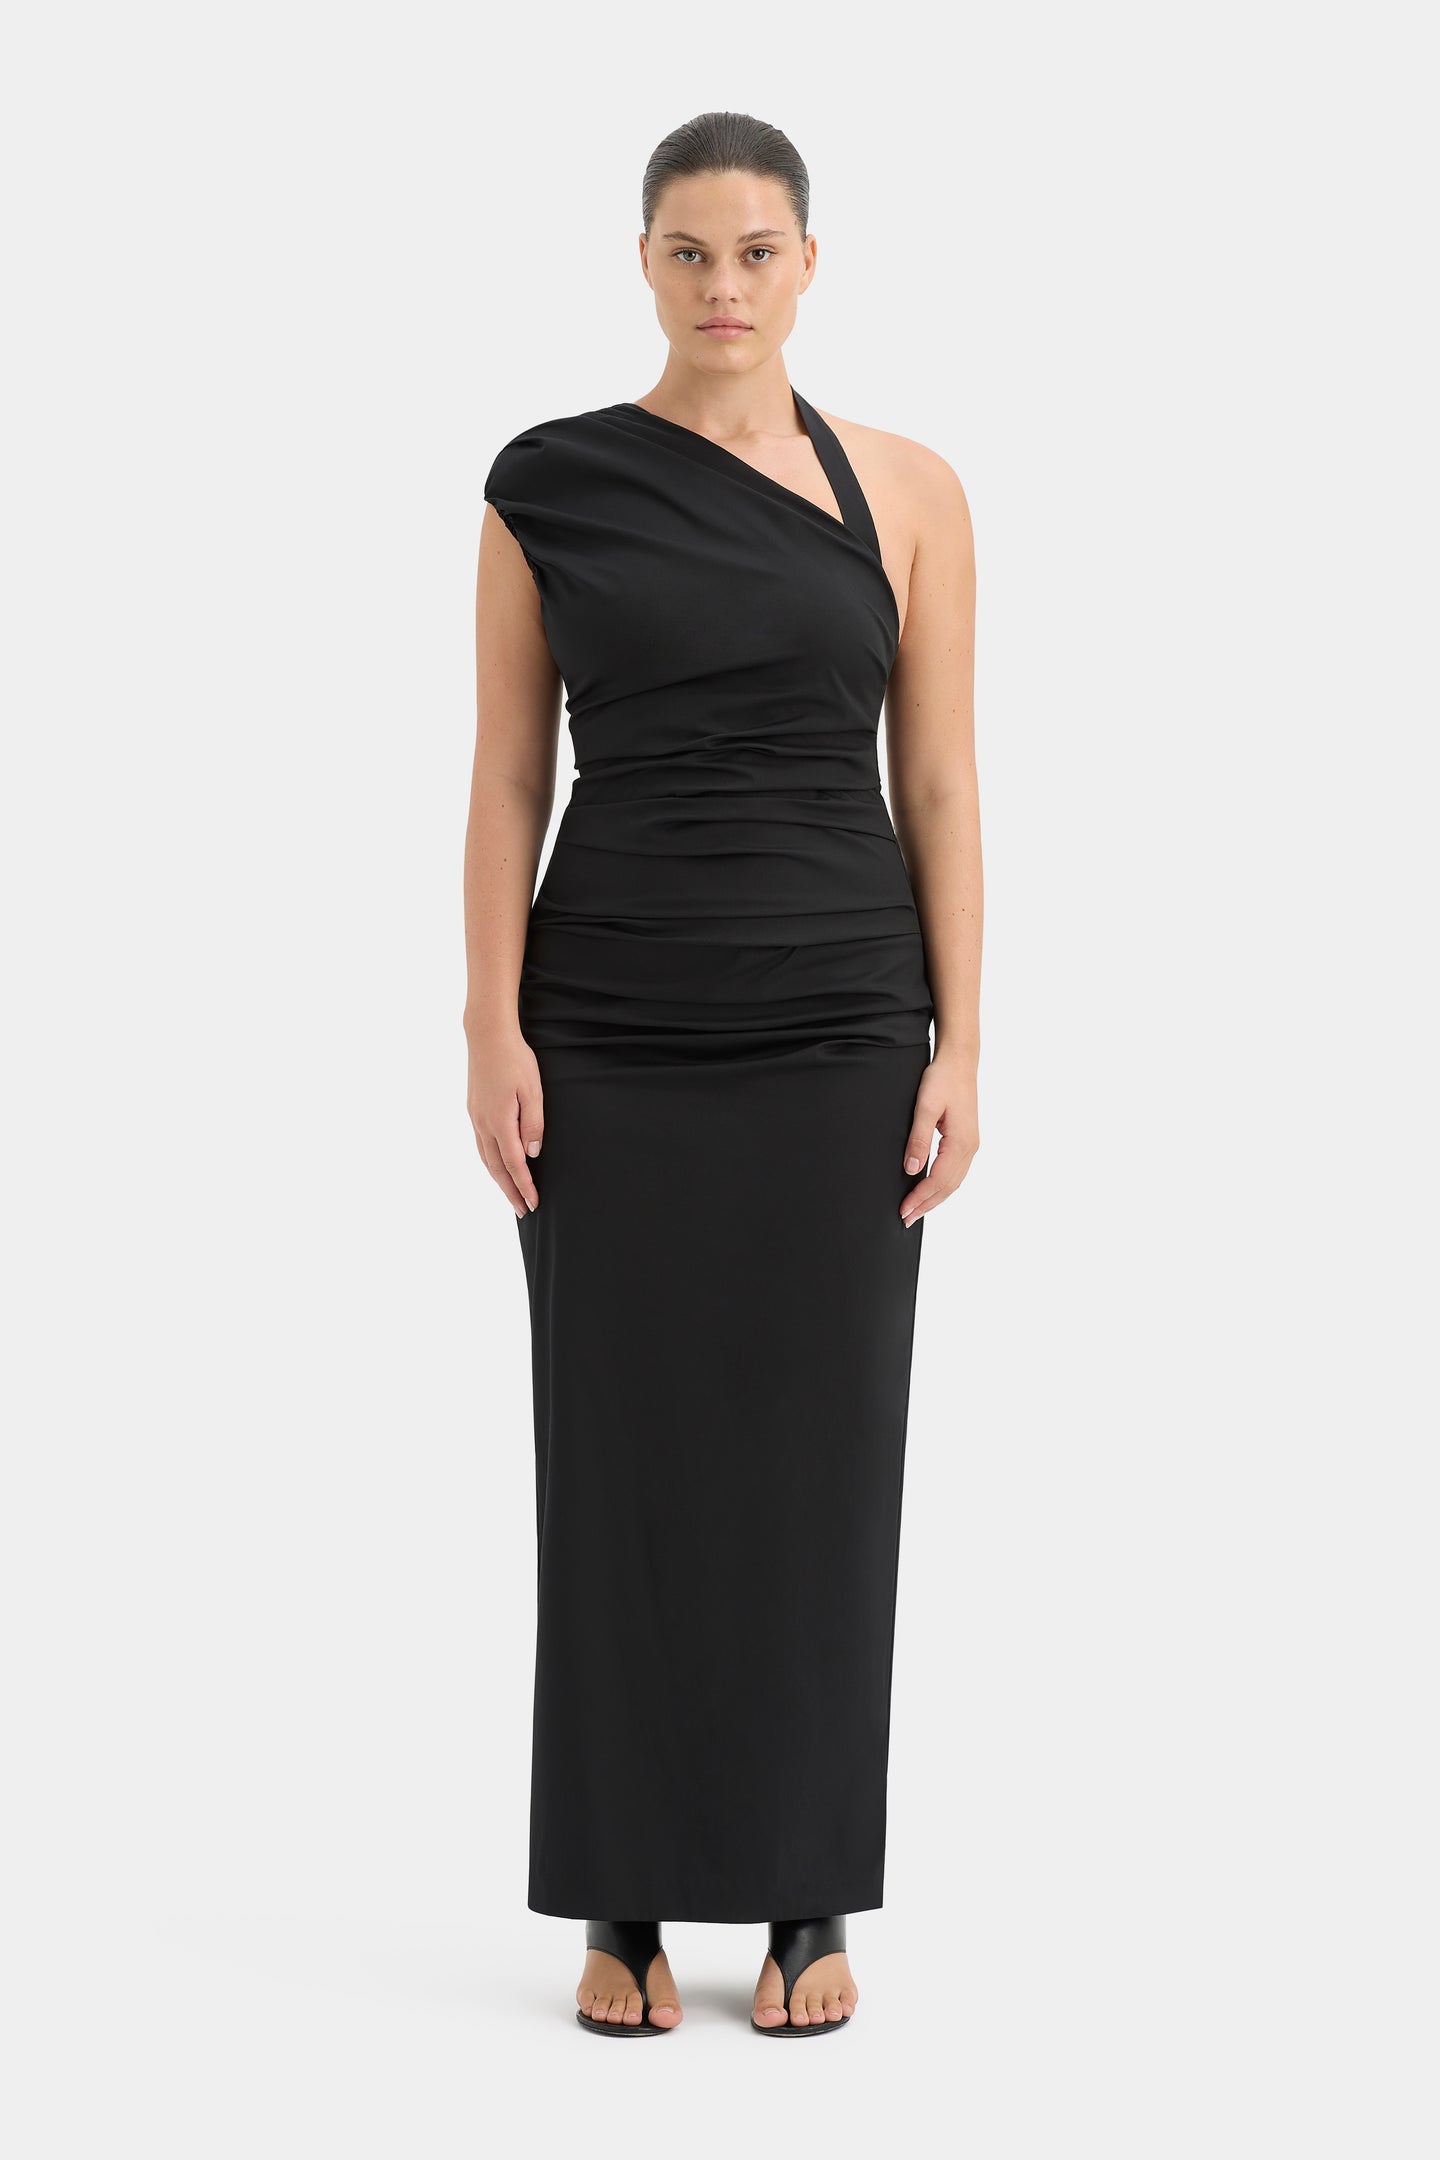 SIR the label Giacomo Gathered Gown Black